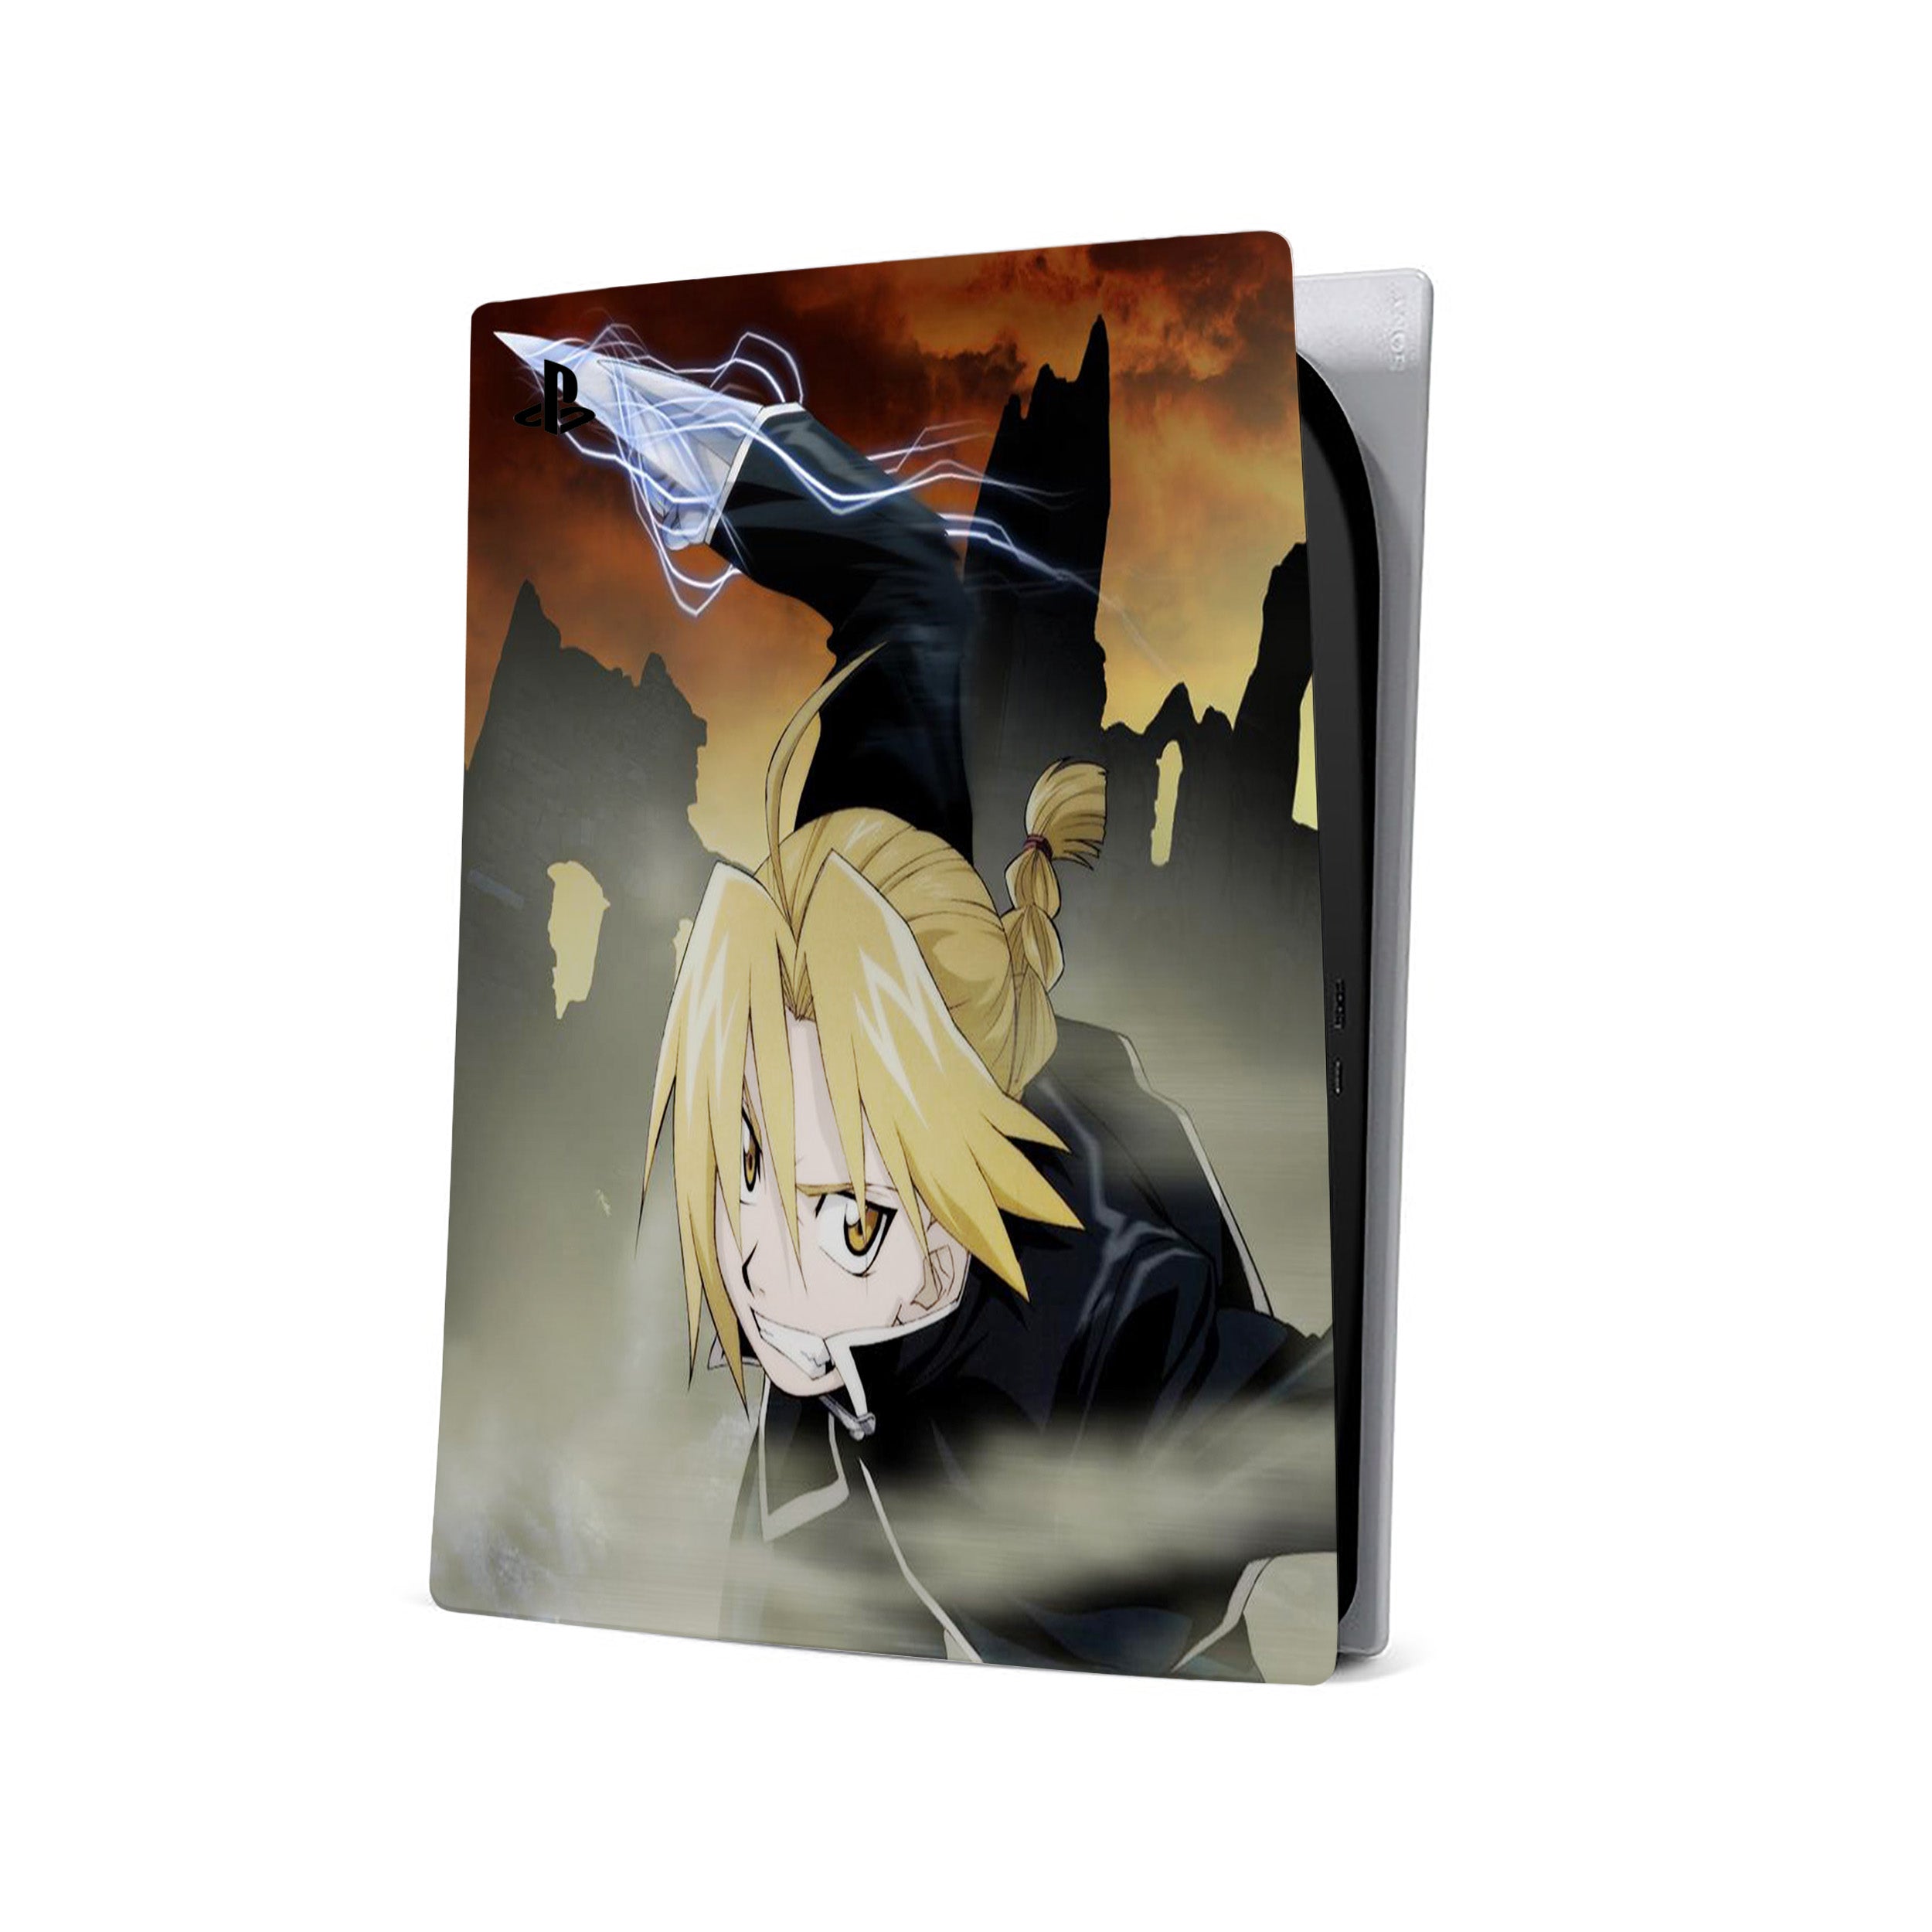 A video game skin featuring a Fullmetal Alchemist Edward Elric design for the PS5.